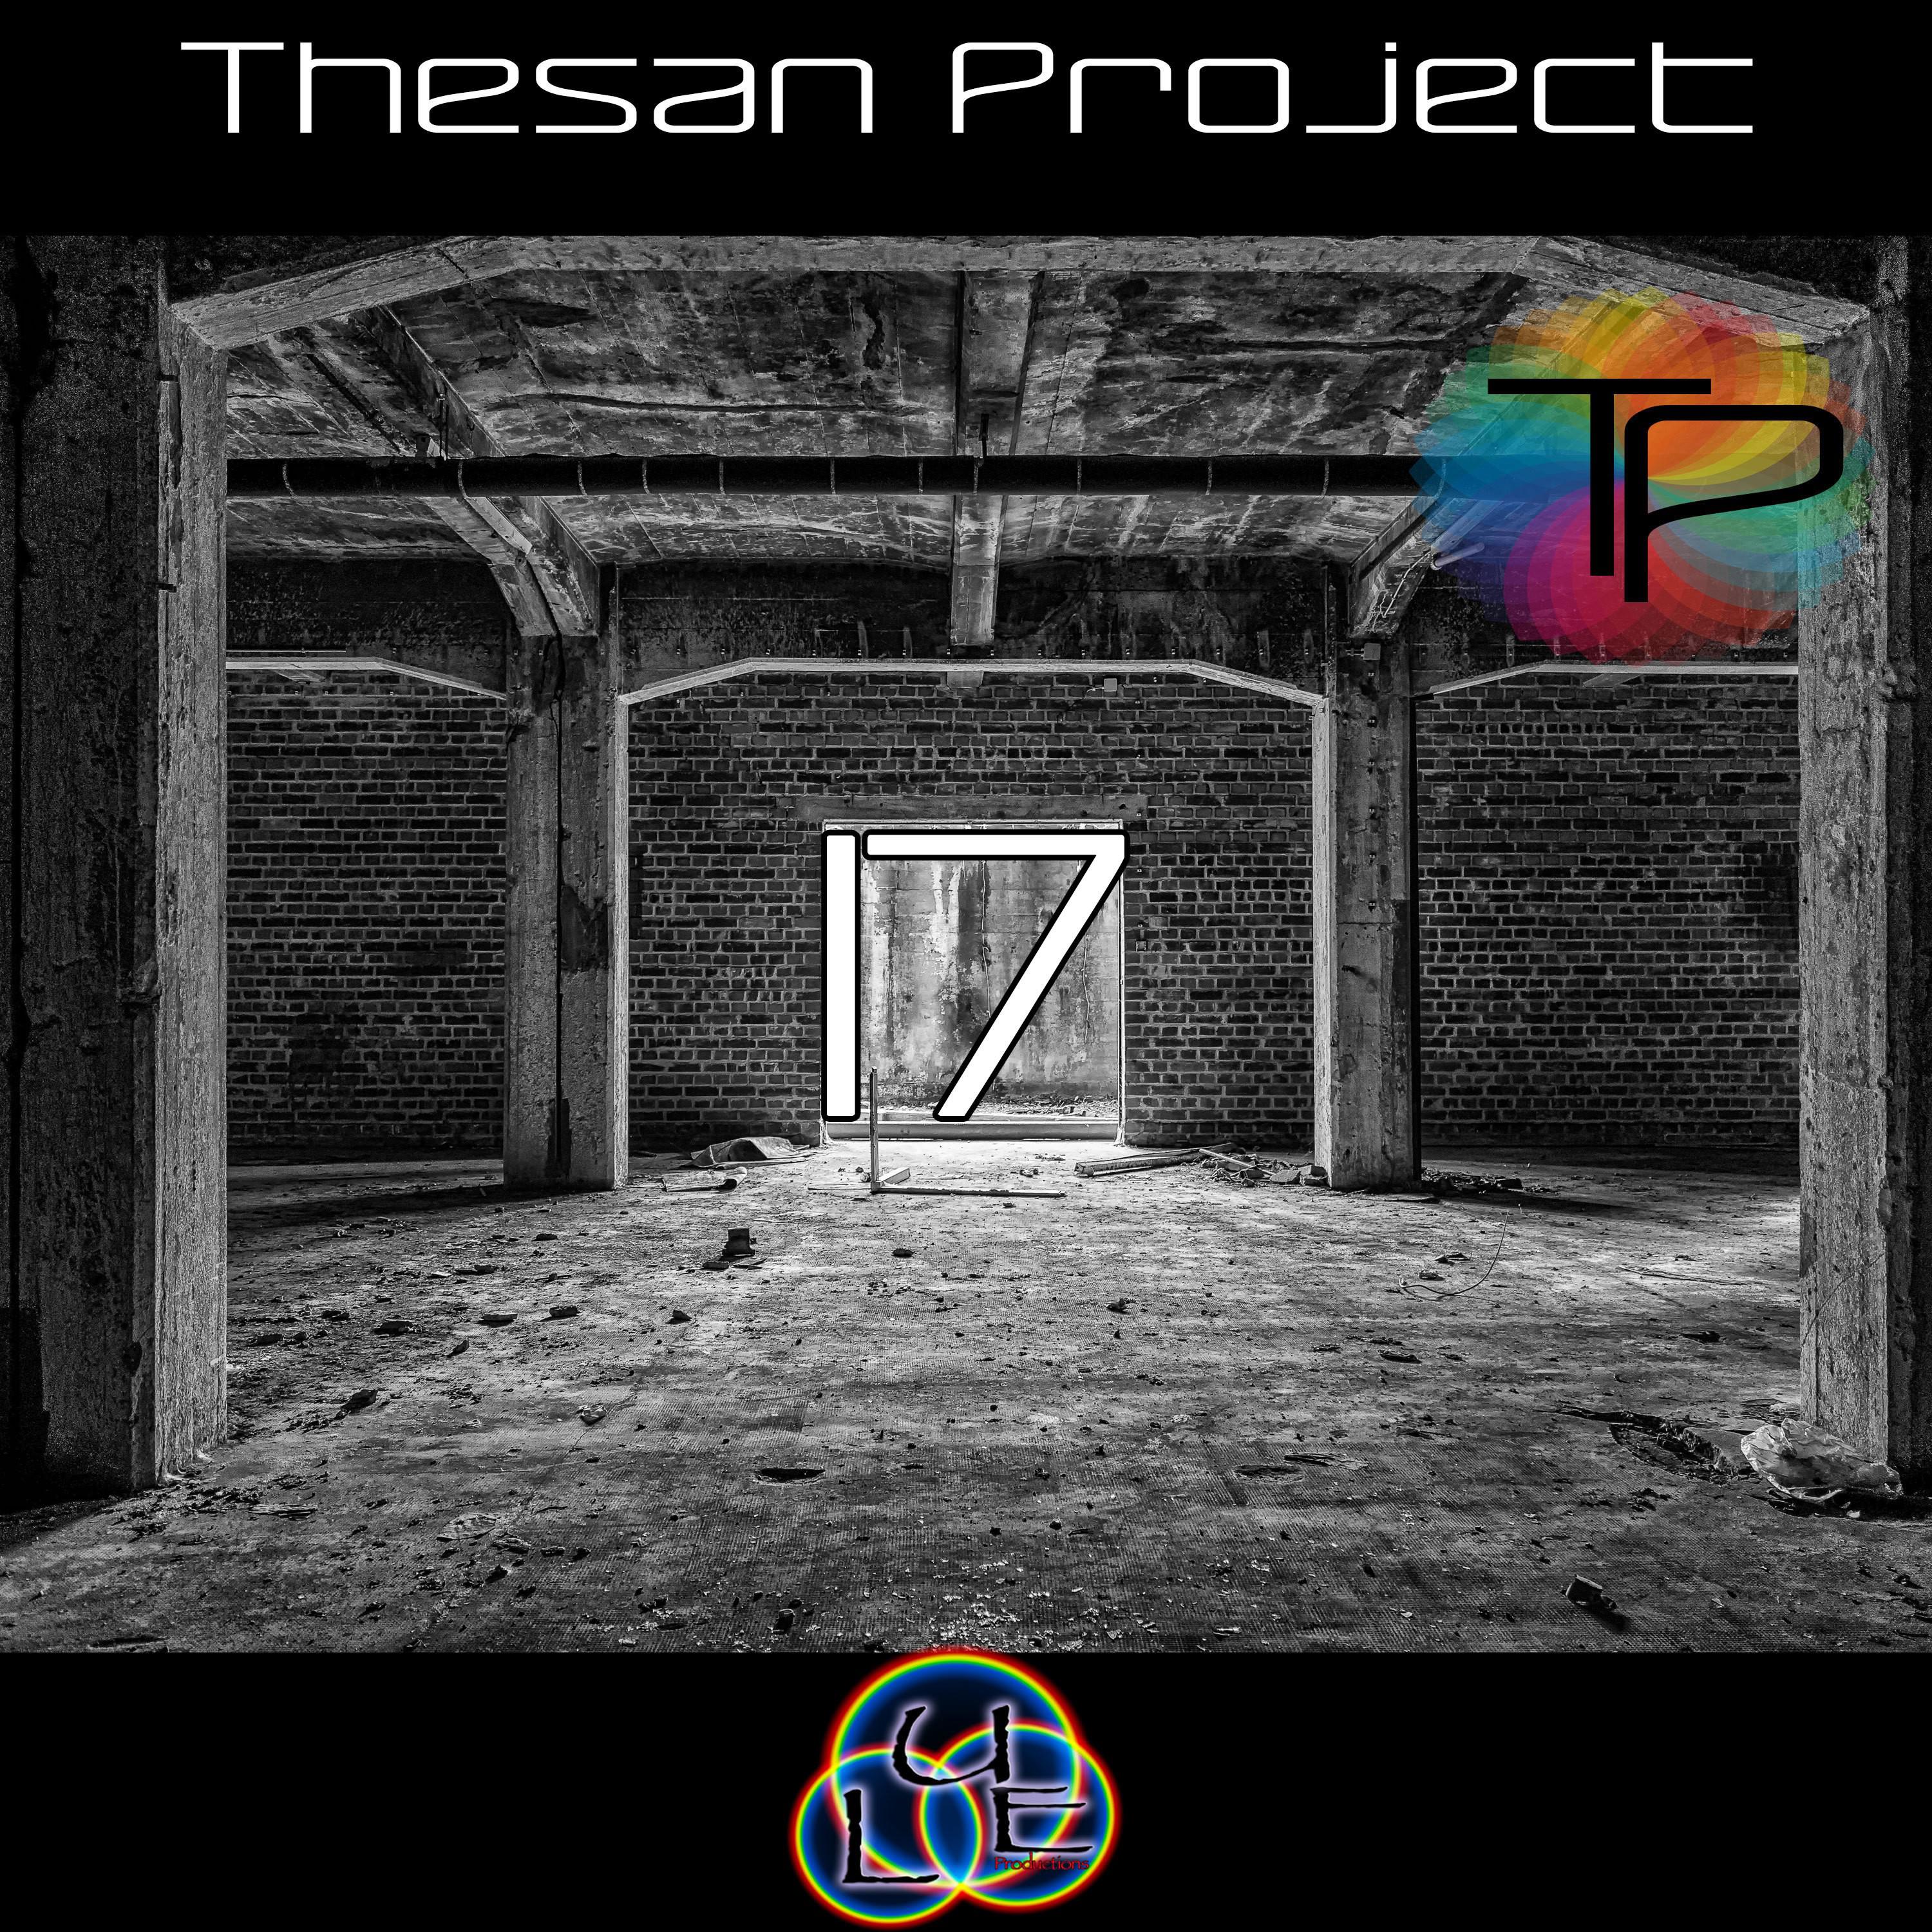 Thesan Project - Be the Change 17 (Edit)